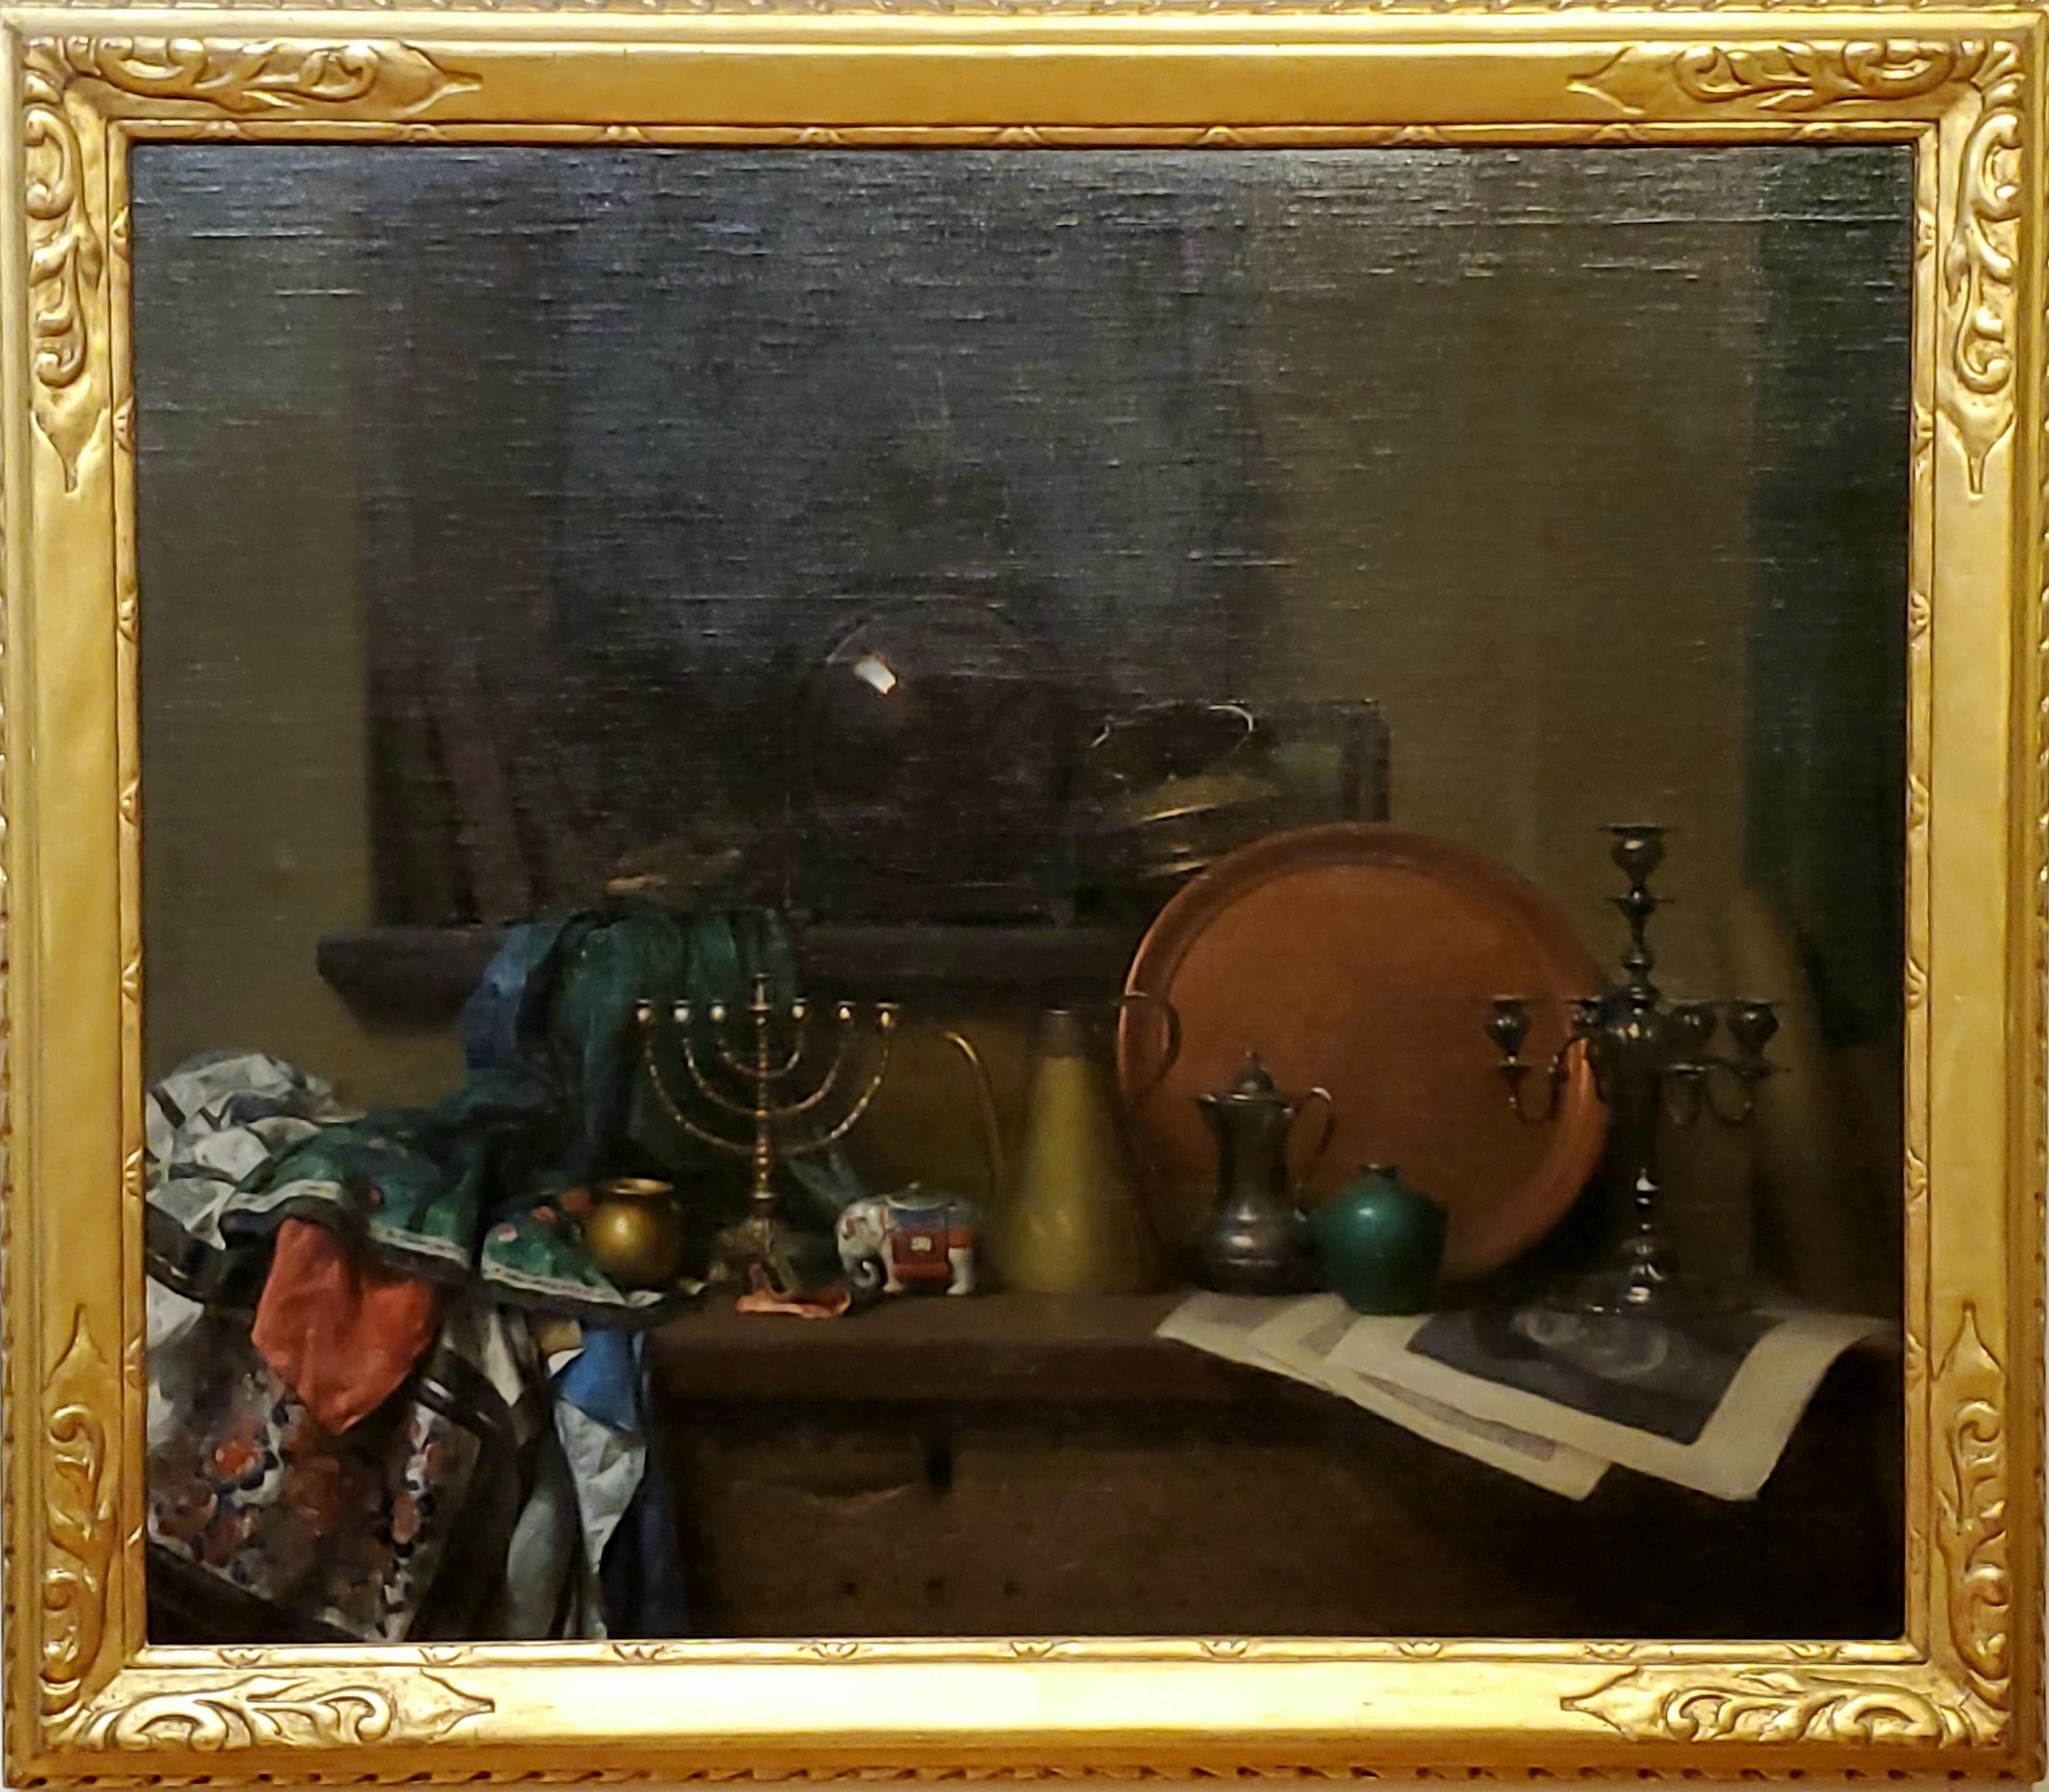 Still life by Benjamin Osro Eggleston.

This antique painting is oil on canvas and measures 34" wide by 40" tall. 

This still life painting measures 40" tall by 46" wide in the frame. 

The frame is a custom carved and gilded Arts and Crafts Style